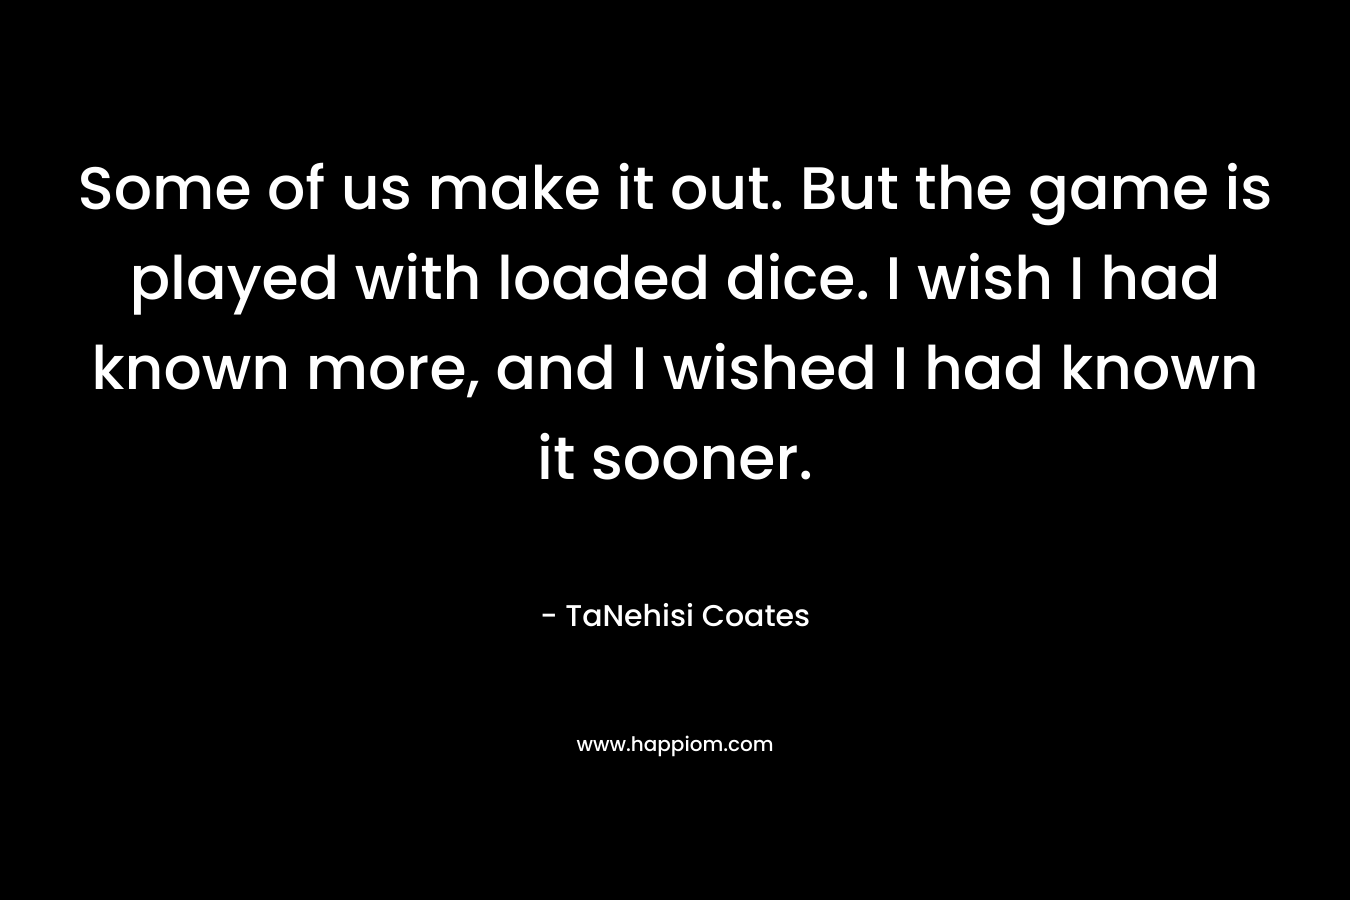 Some of us make it out. But the game is played with loaded dice. I wish I had known more, and I wished I had known it sooner. – TaNehisi Coates